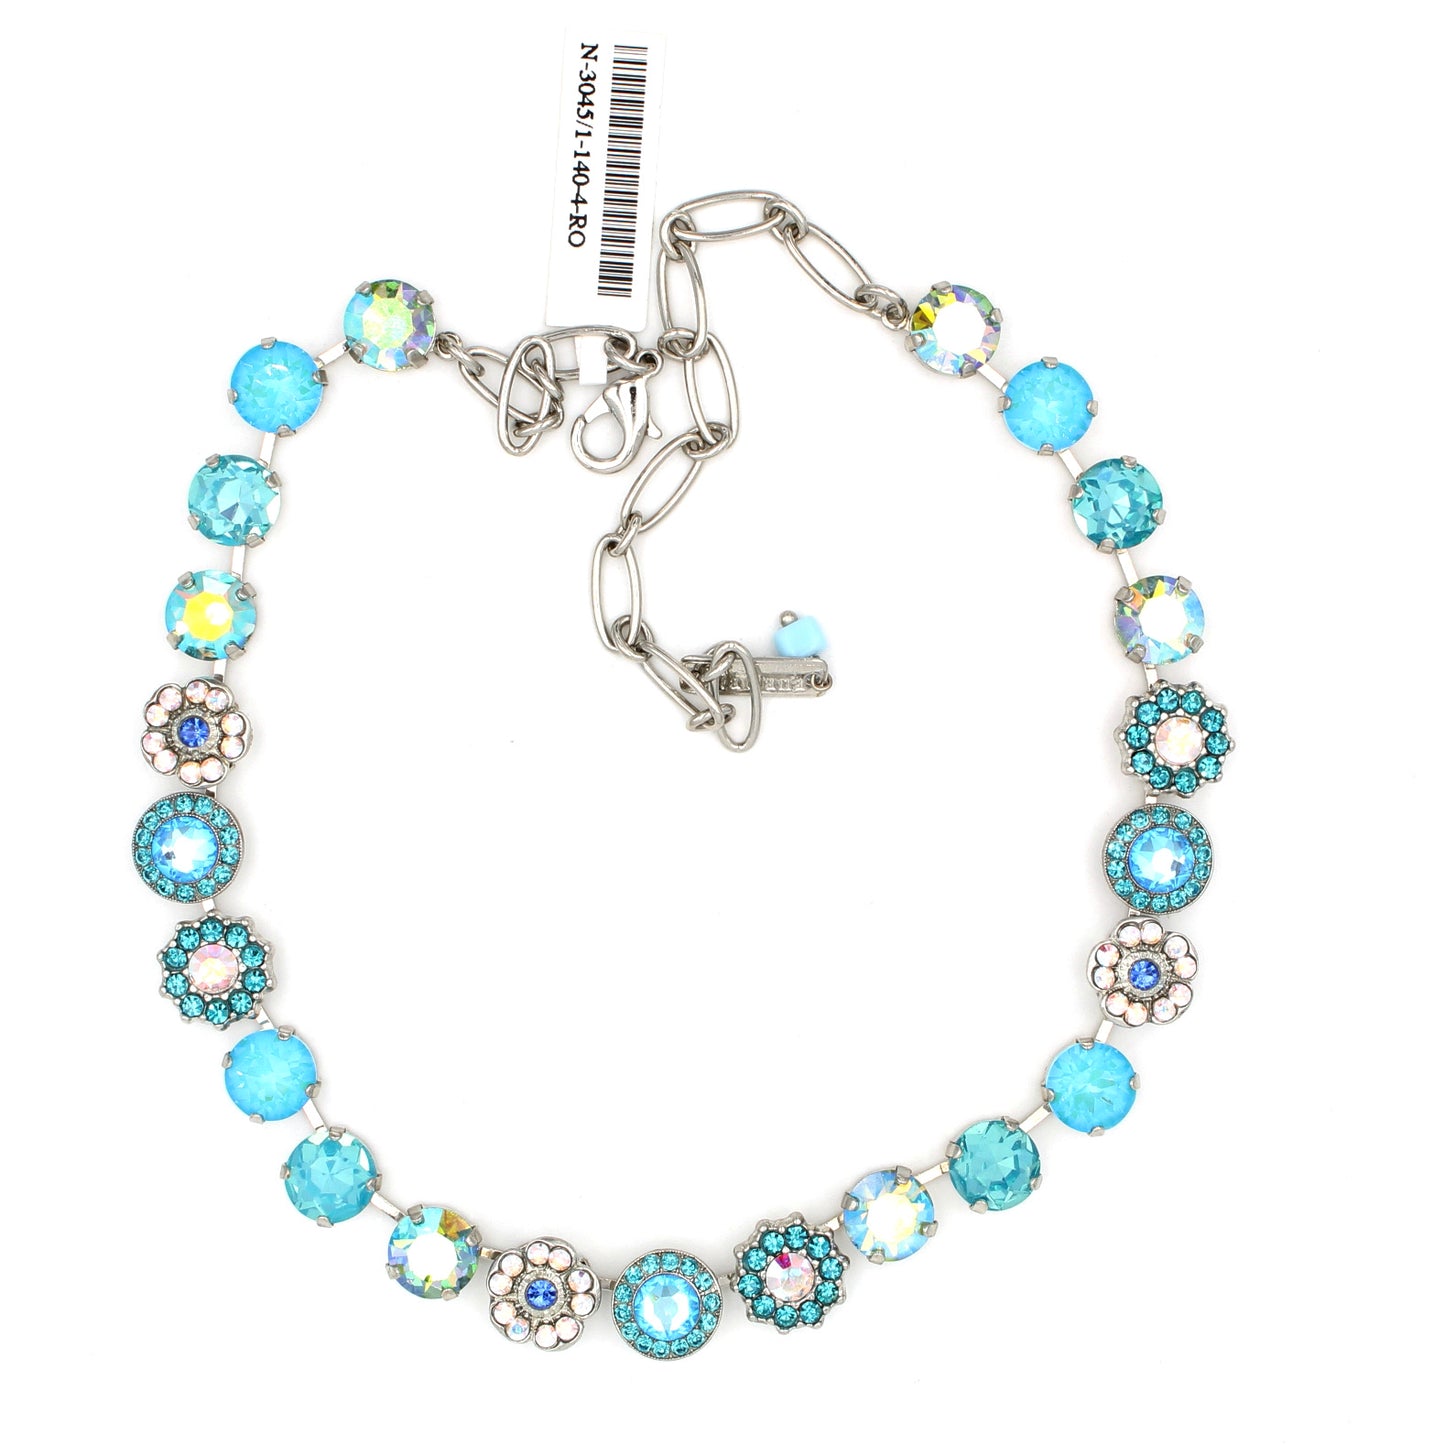 Tranquil Collection Lovable Mixed Element Crystal Necklace - MaryTyke's